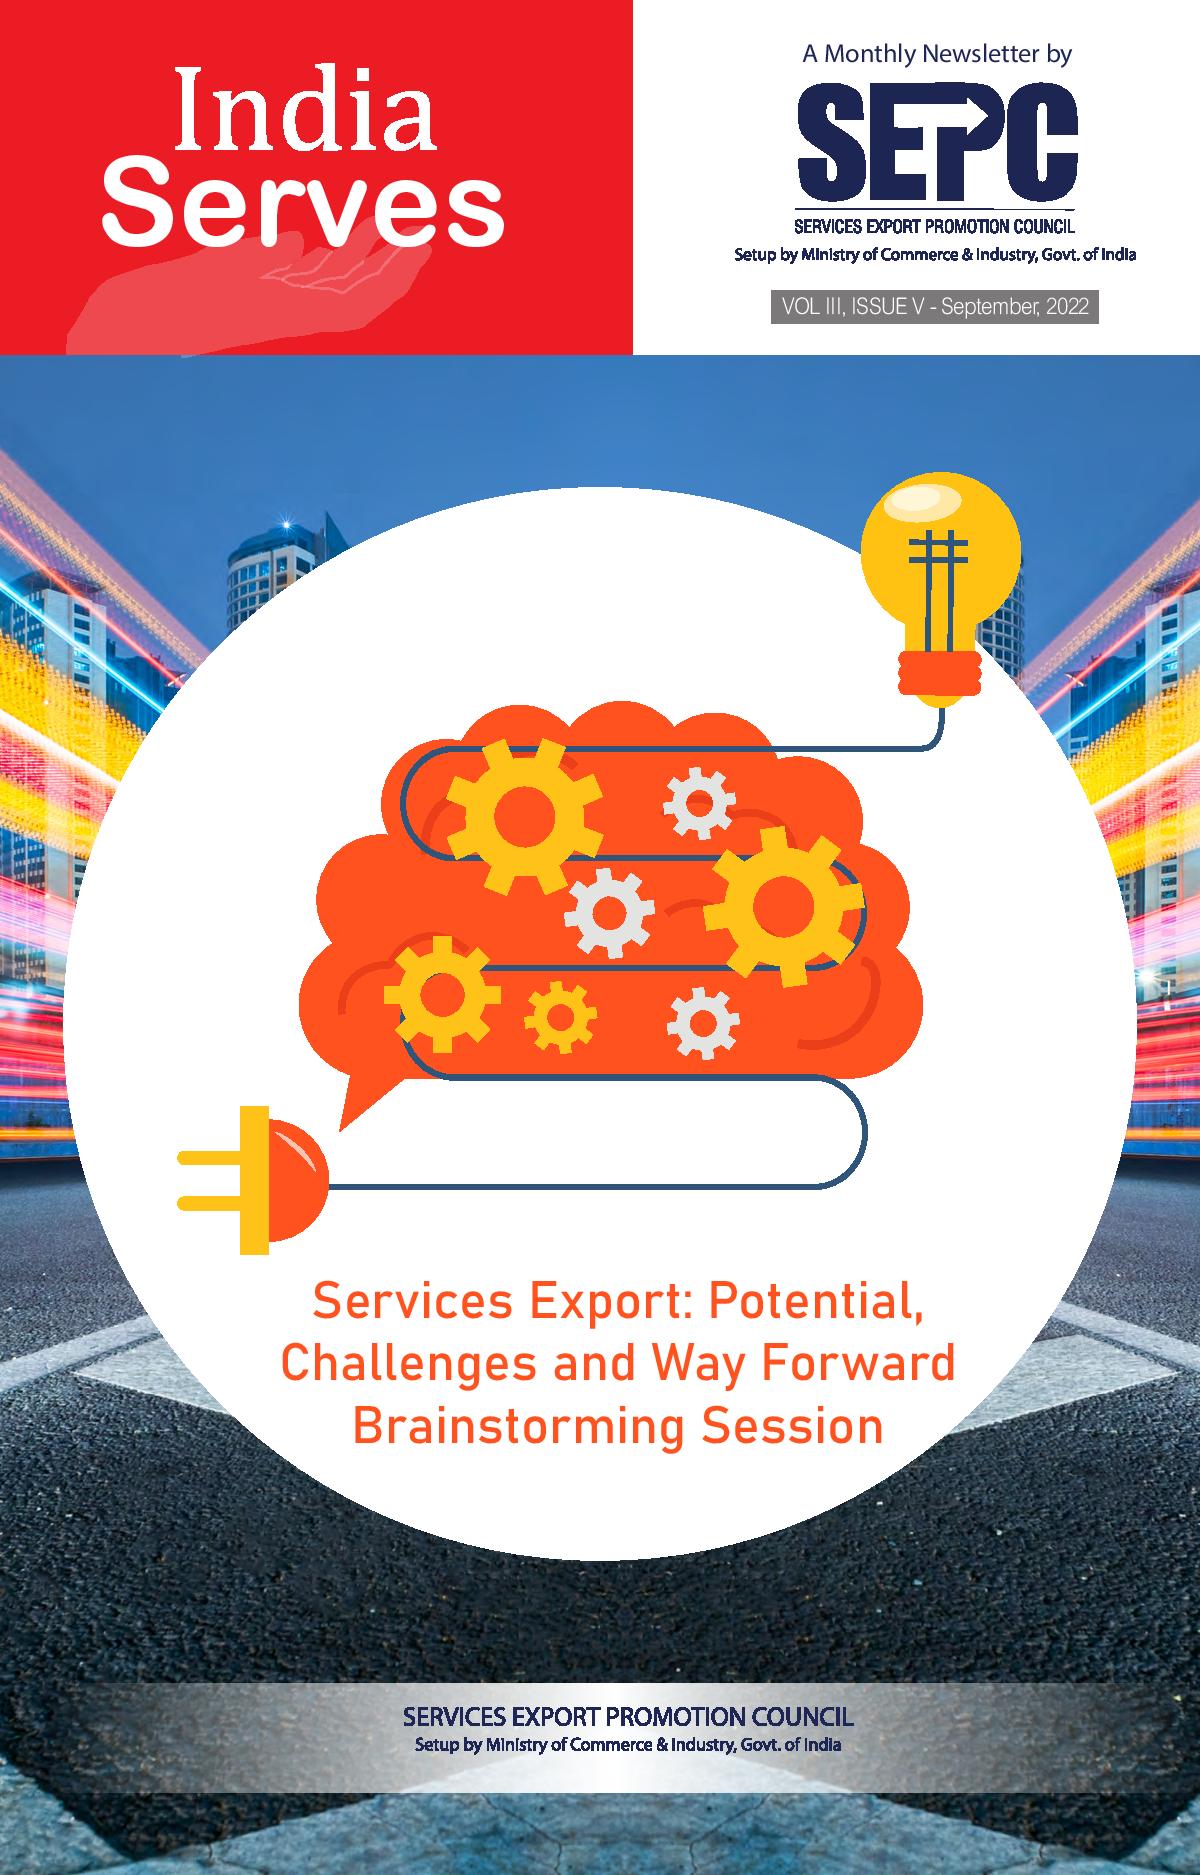 Services Export: Potential, Challenges and Way Forward Brainstorming Session